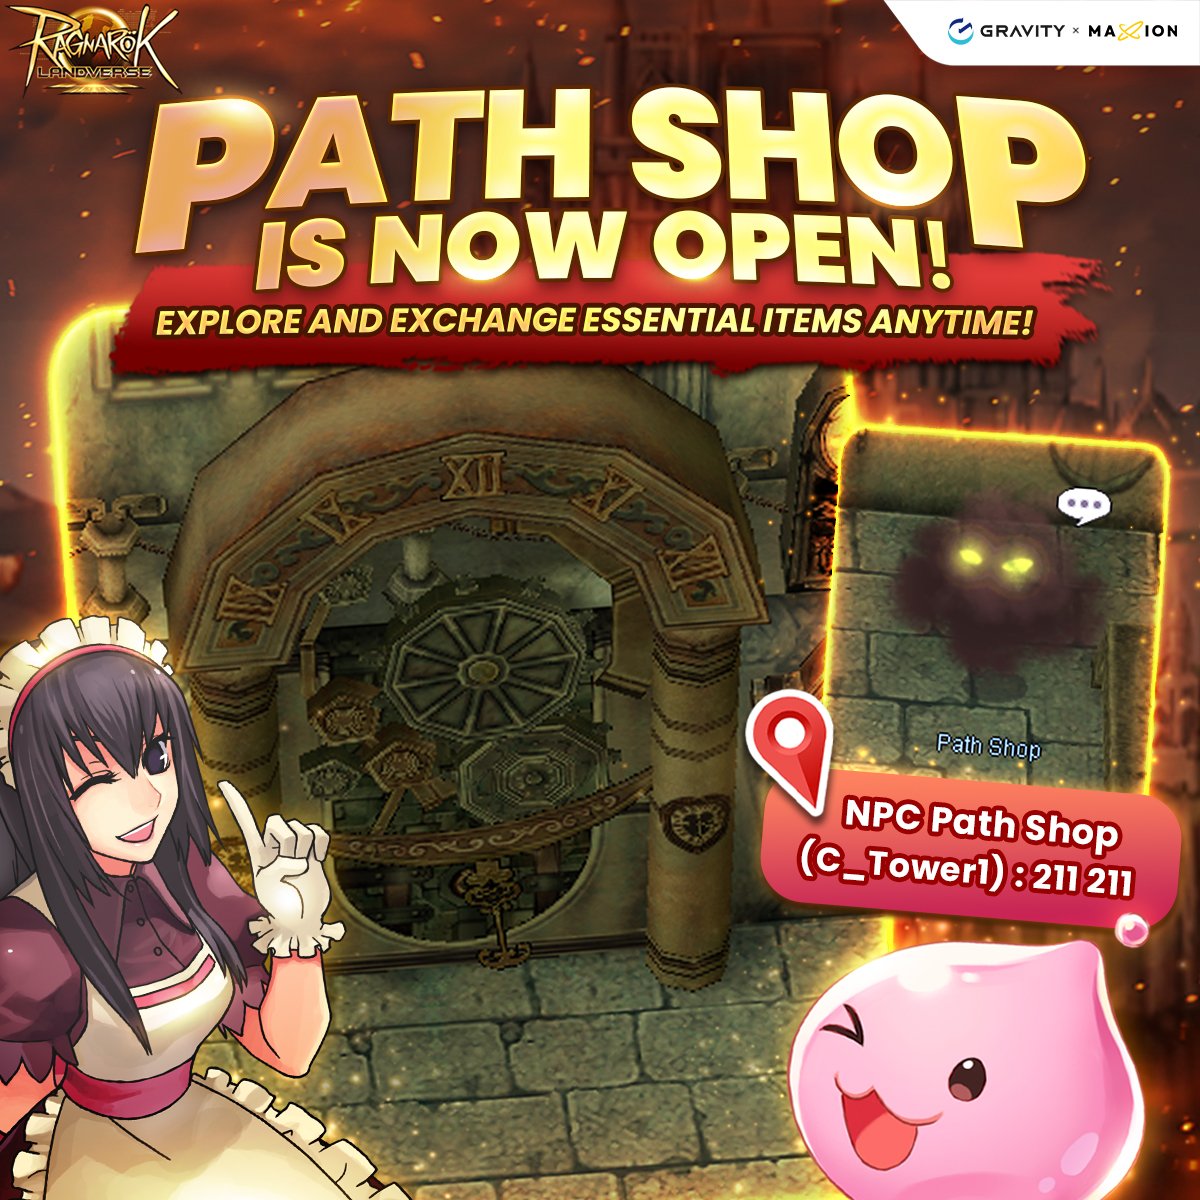 Ragnarok Landverse has officially opened The Path Shop for you to claim your rewards.
.
March over to (c_Tower1): 211 211 with your tokens and grab the items you've earned! 🗝️🎁
.
📜 For details visit : news.landverse.maxion.gg/2024/01/08/rag…
.
#RagnarokOnline #Web3Gaming #PCMMORPG